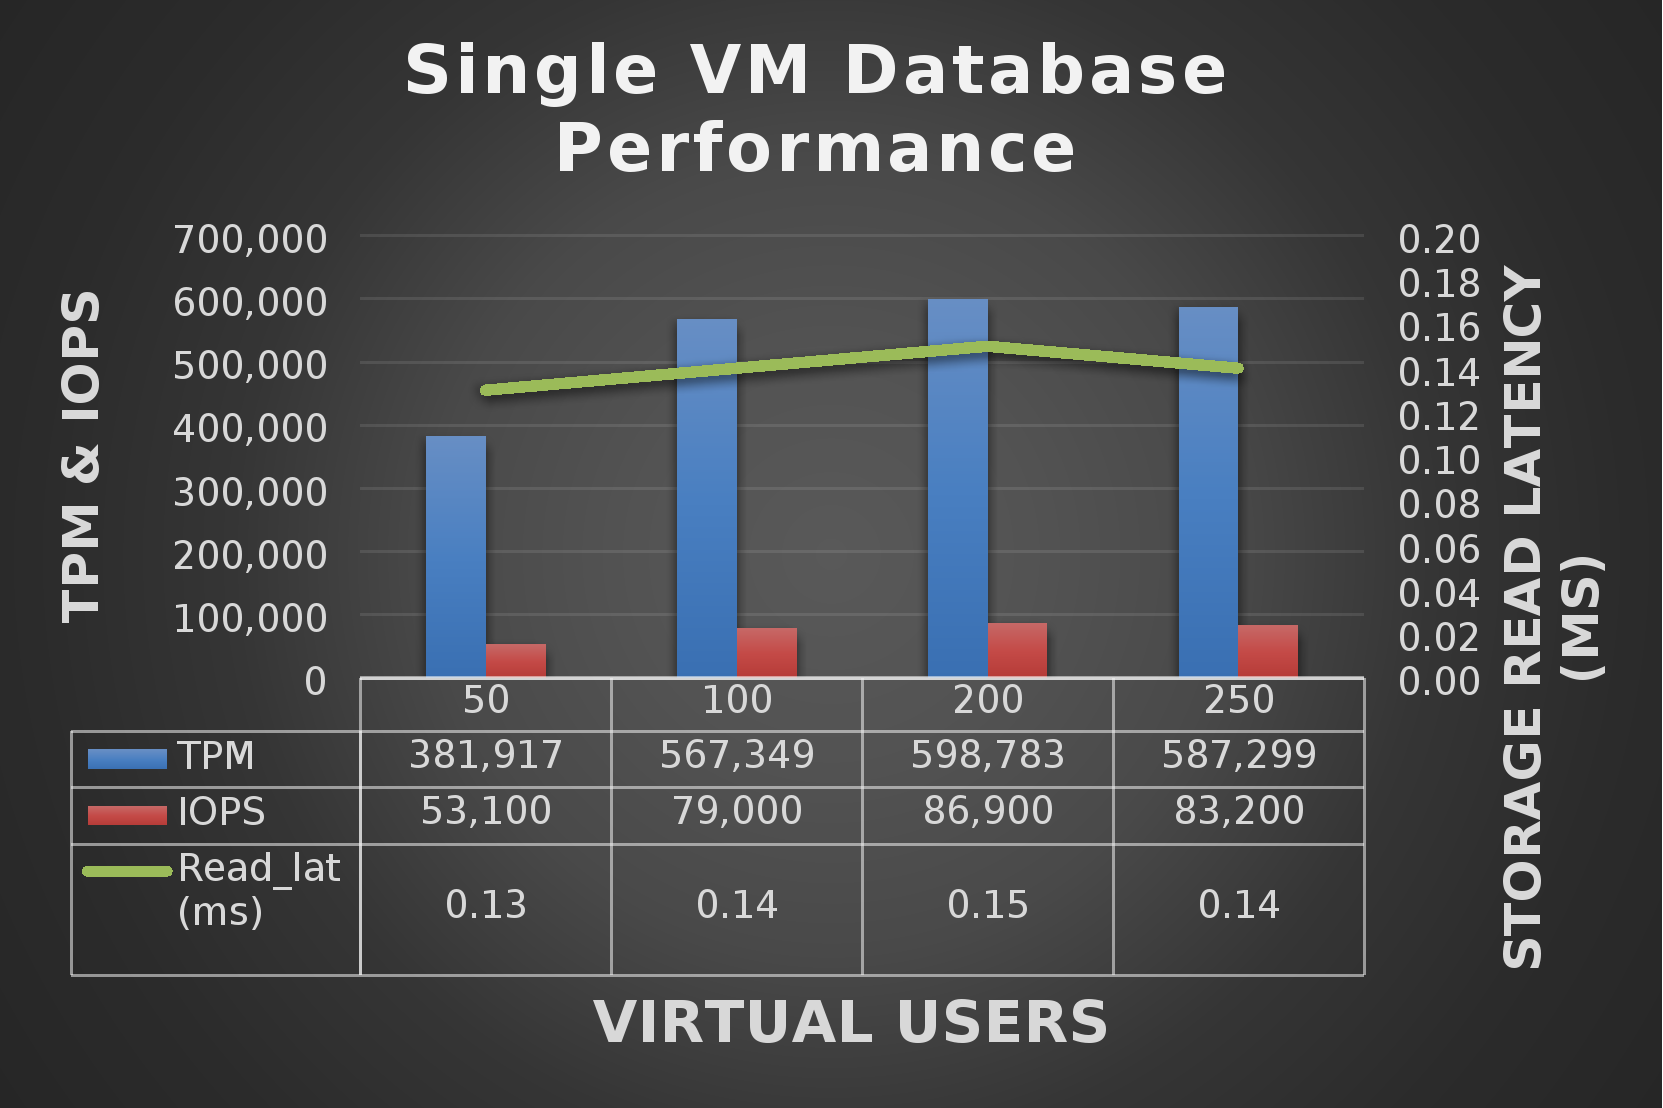 This figure shows the singe instance database test performance results.